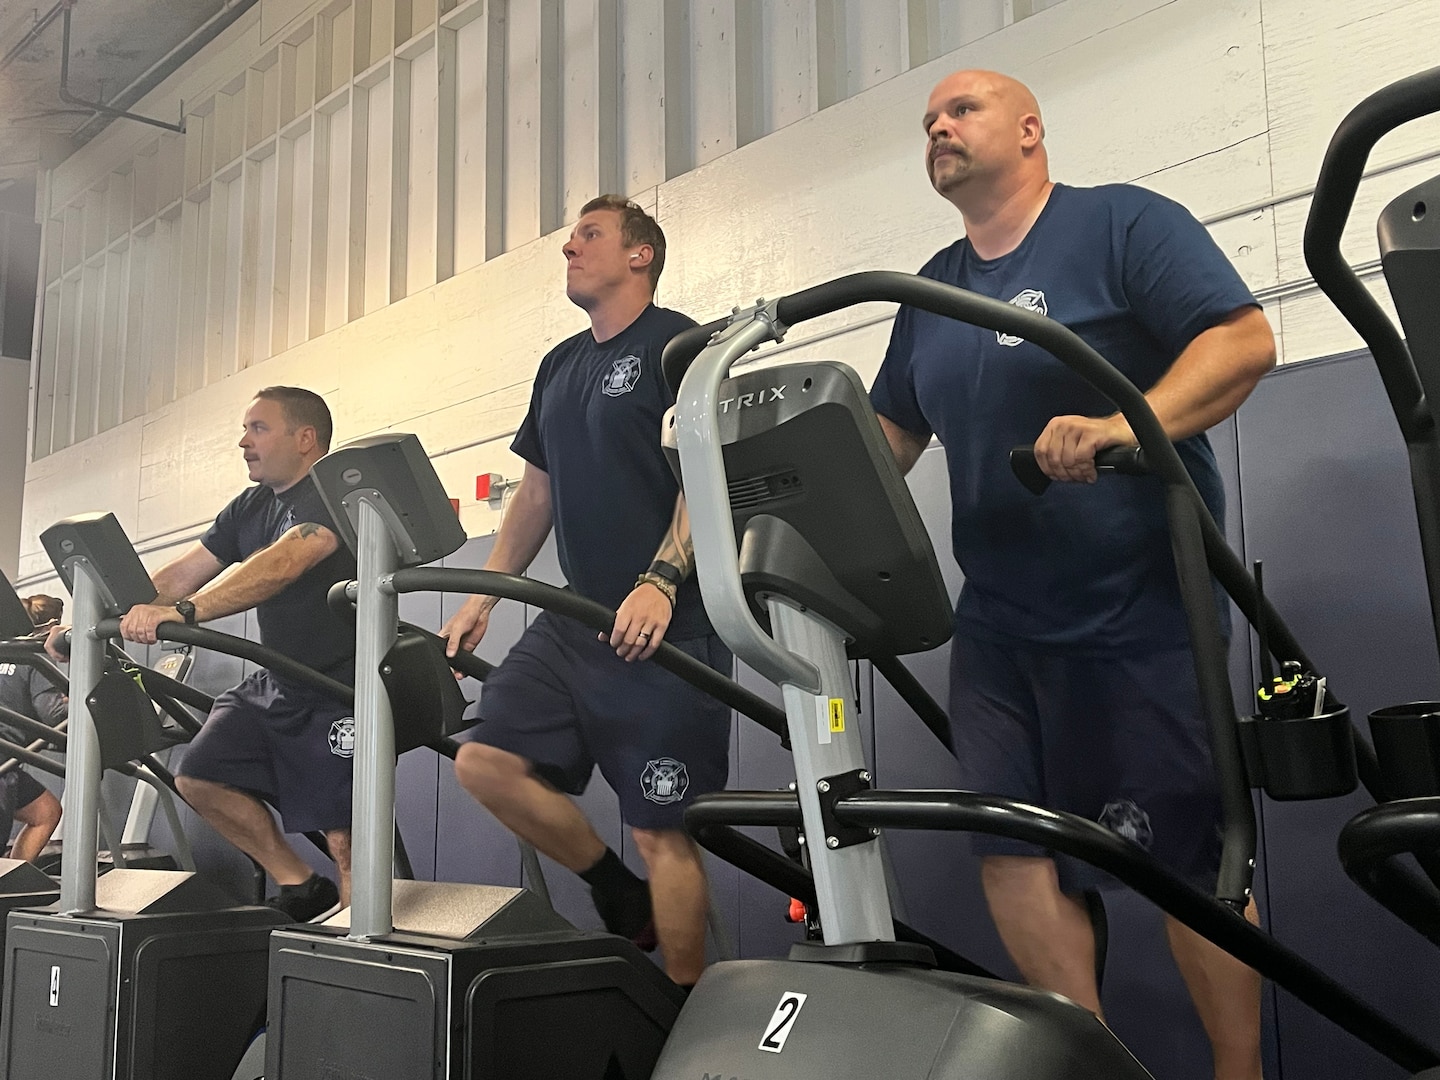 Three men work out on stair machines.